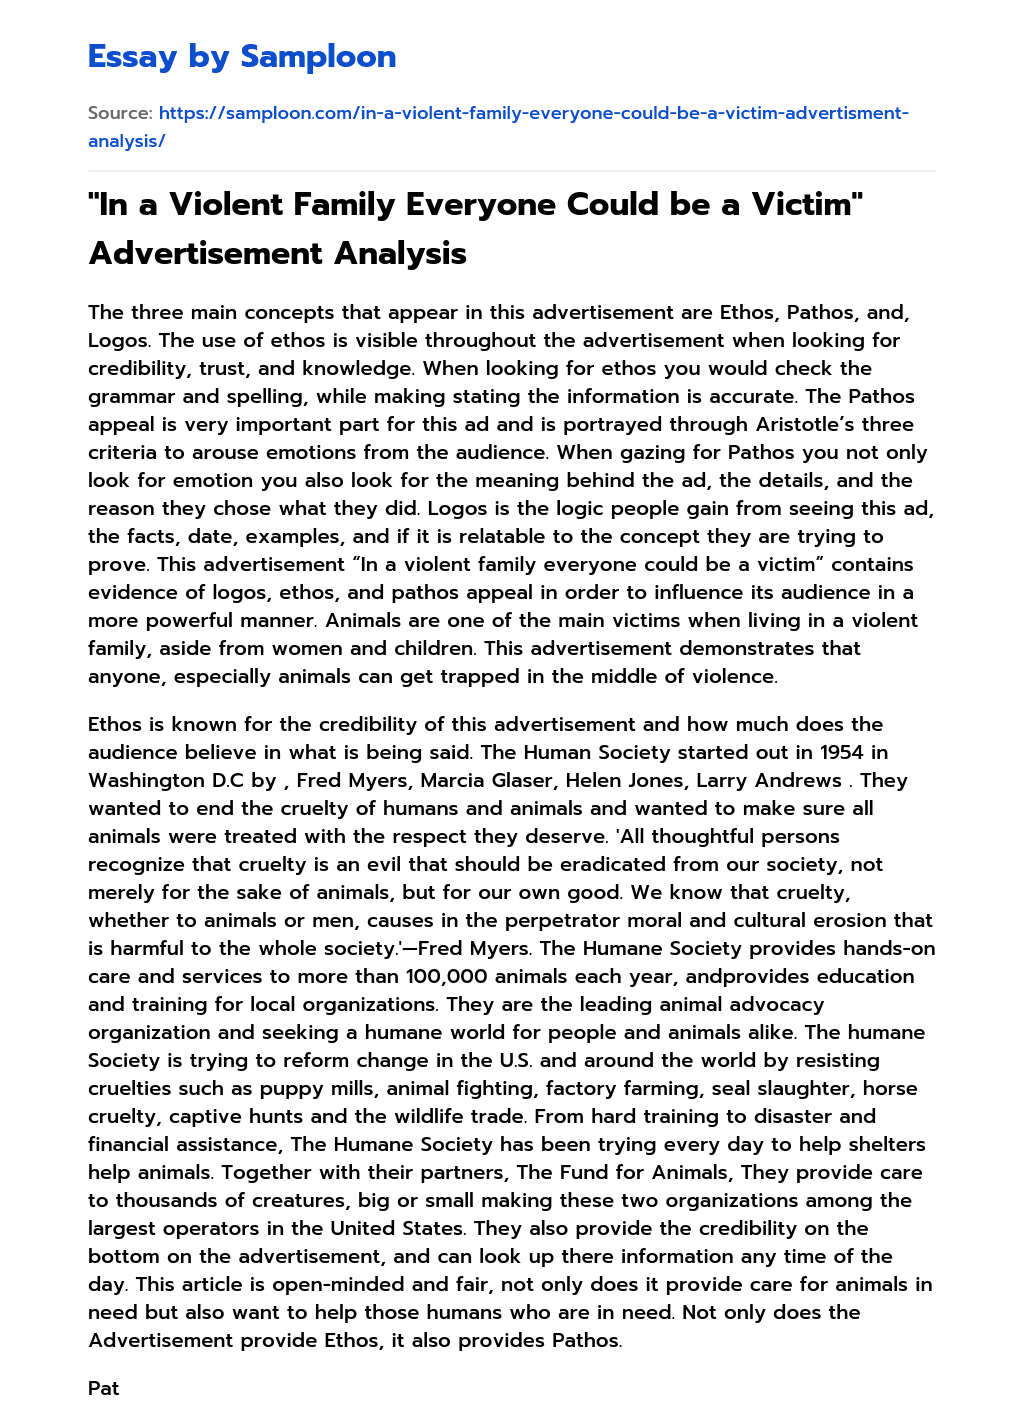 “In a Violent Family Everyone Could be a Victim” Advertisement Analysis essay